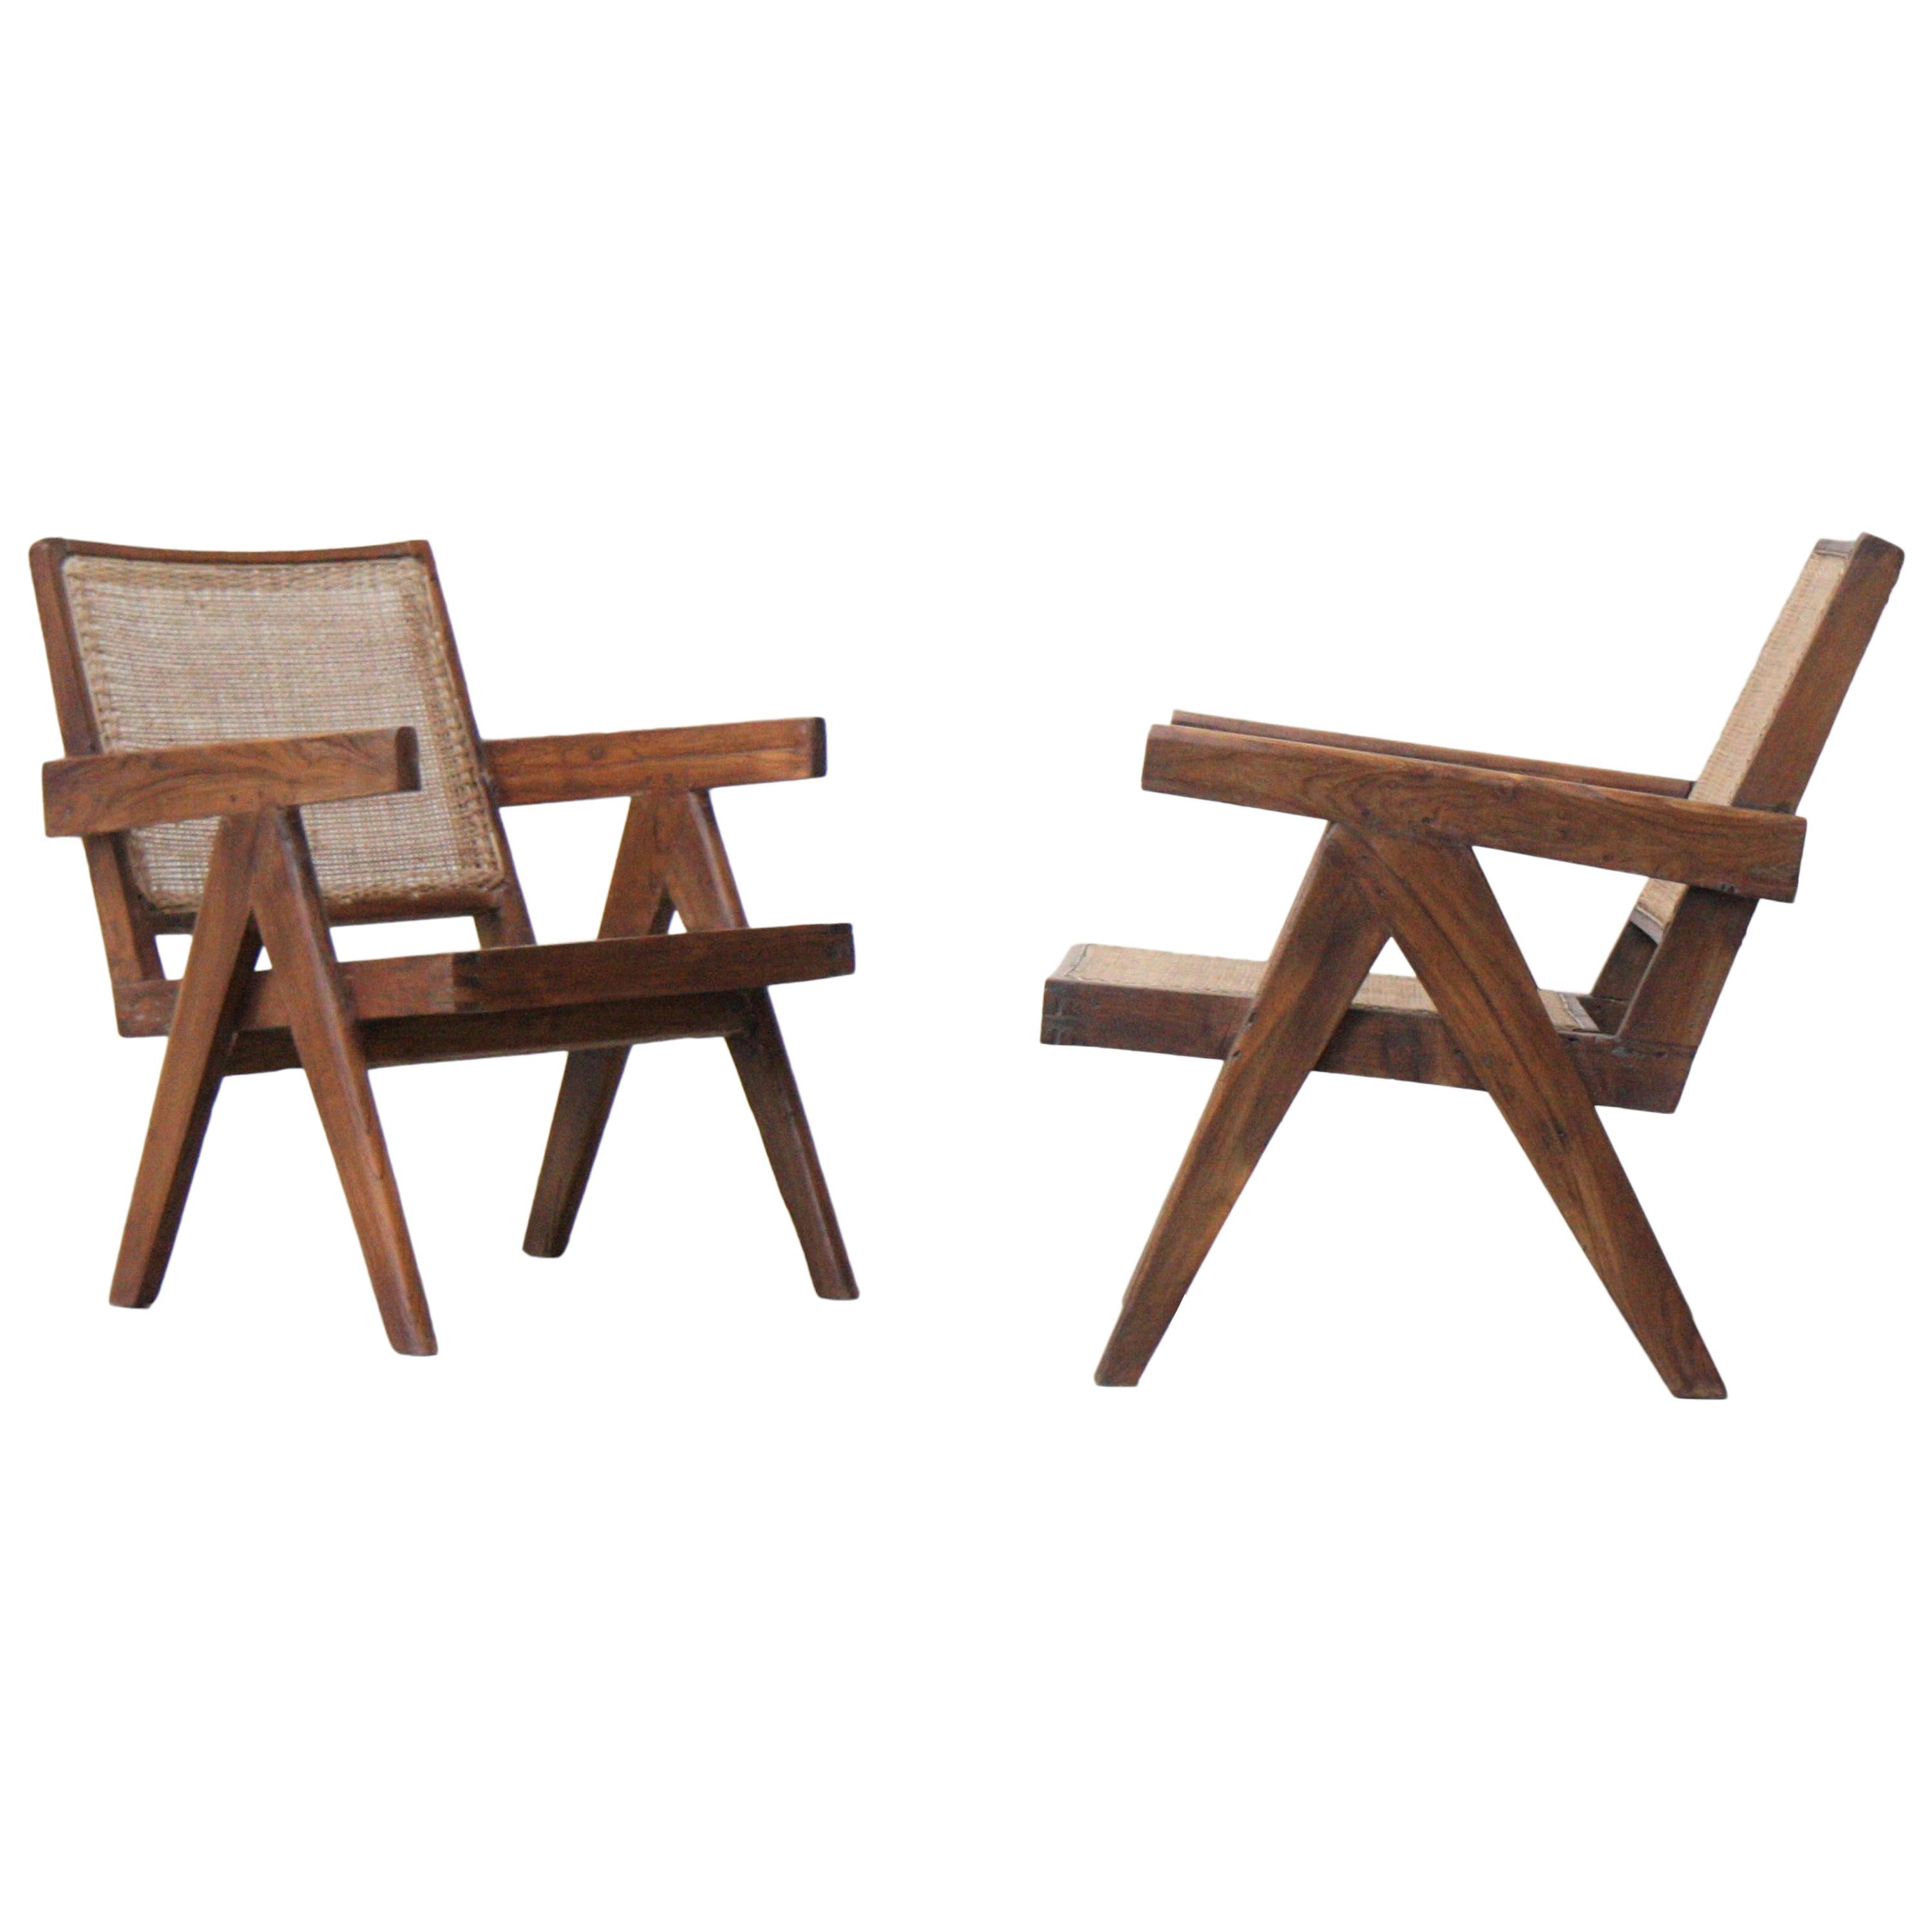 Set of Two 'Easy Armchairs' Circa 1955 by Pierre Jeanneret '1896-1967'